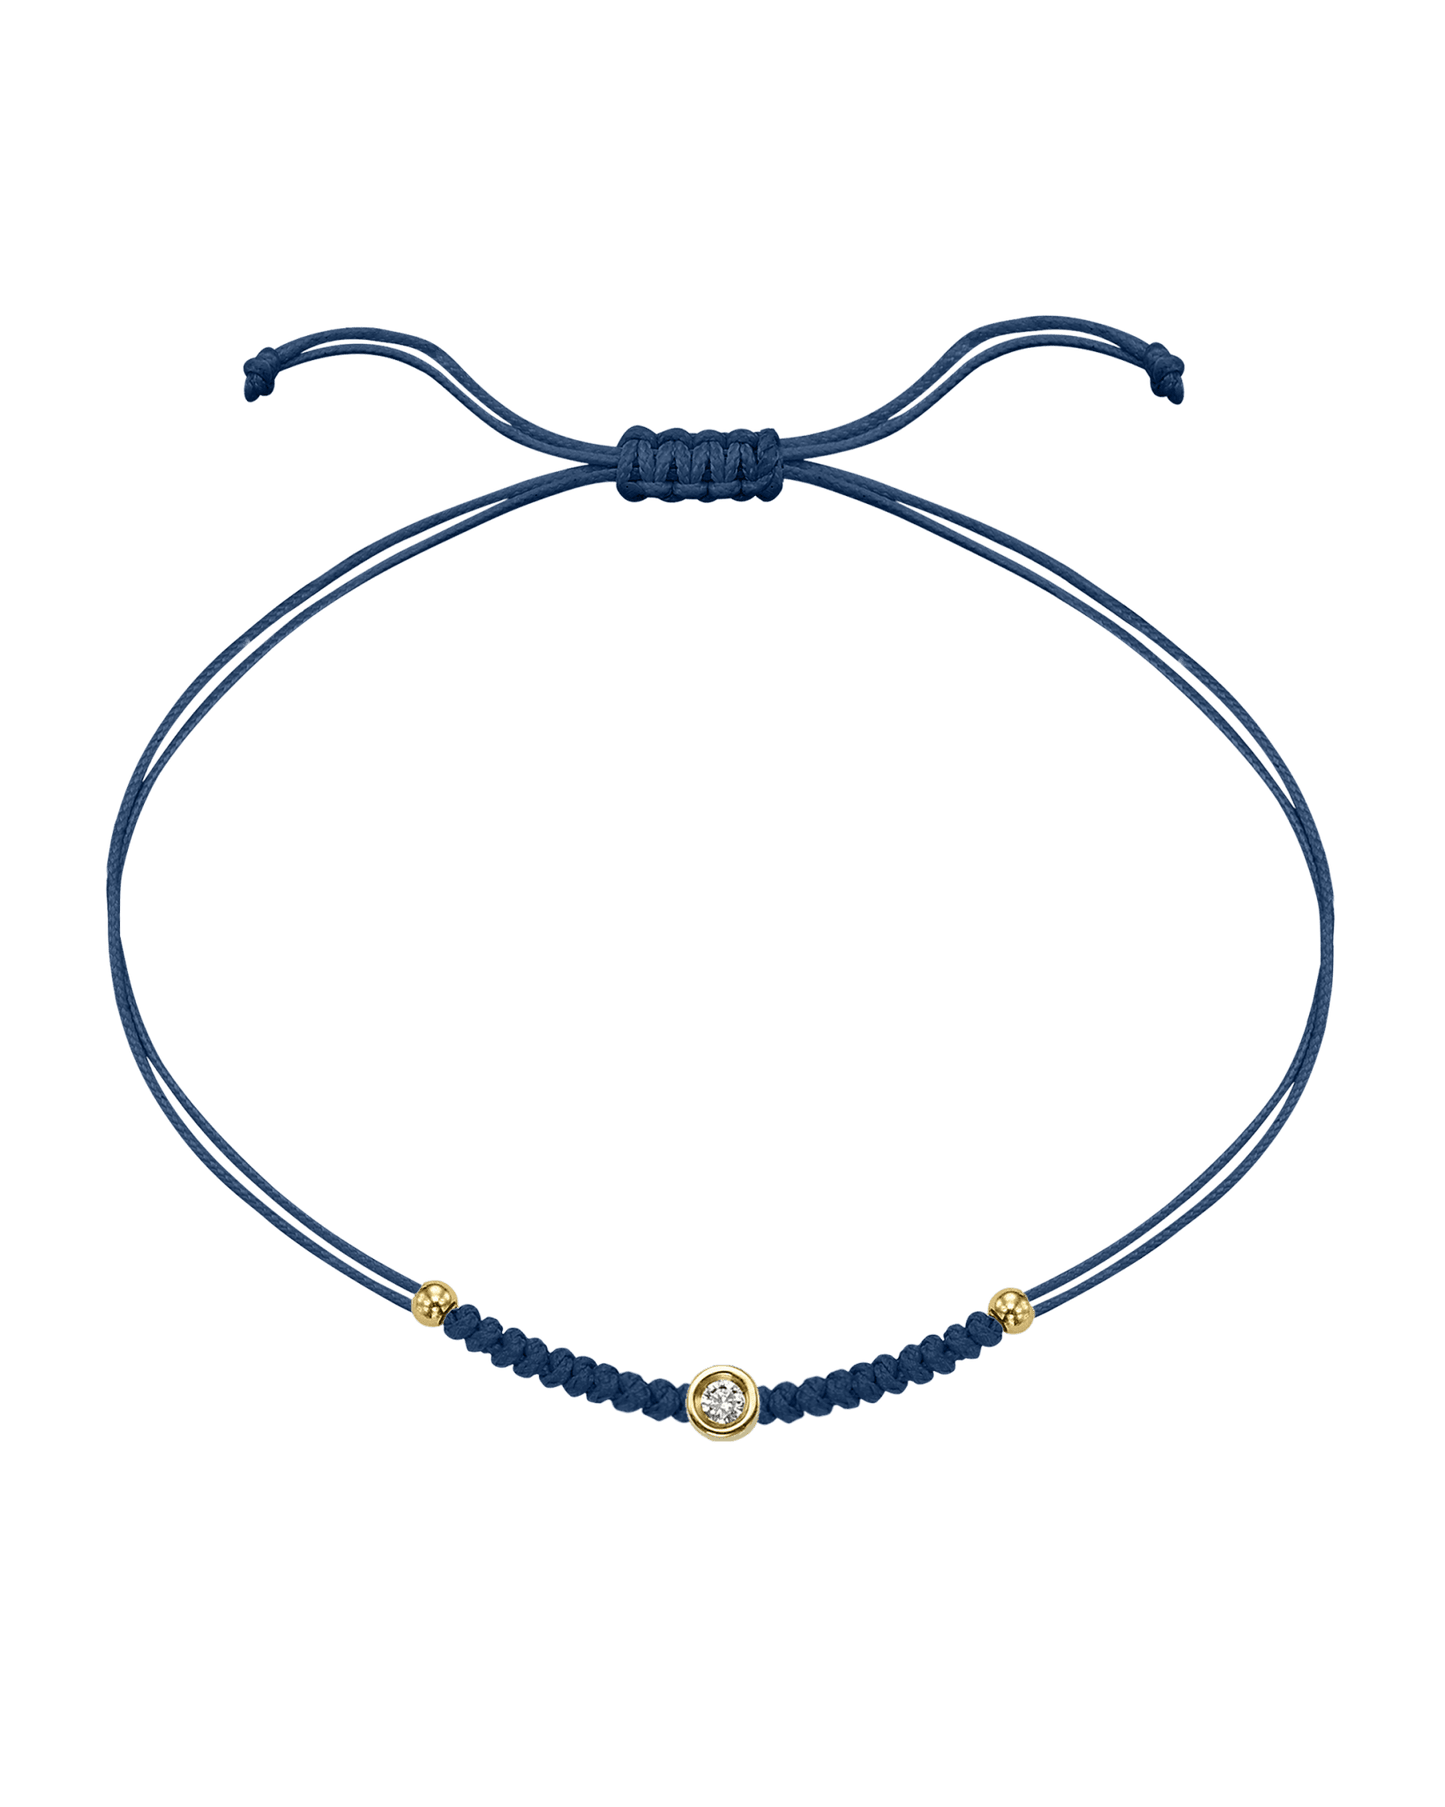 Solid Gold Sphere String of Love - 14K Yellow Gold Bracelet 14K Solid Gold Indigo Small: 0.03ct 